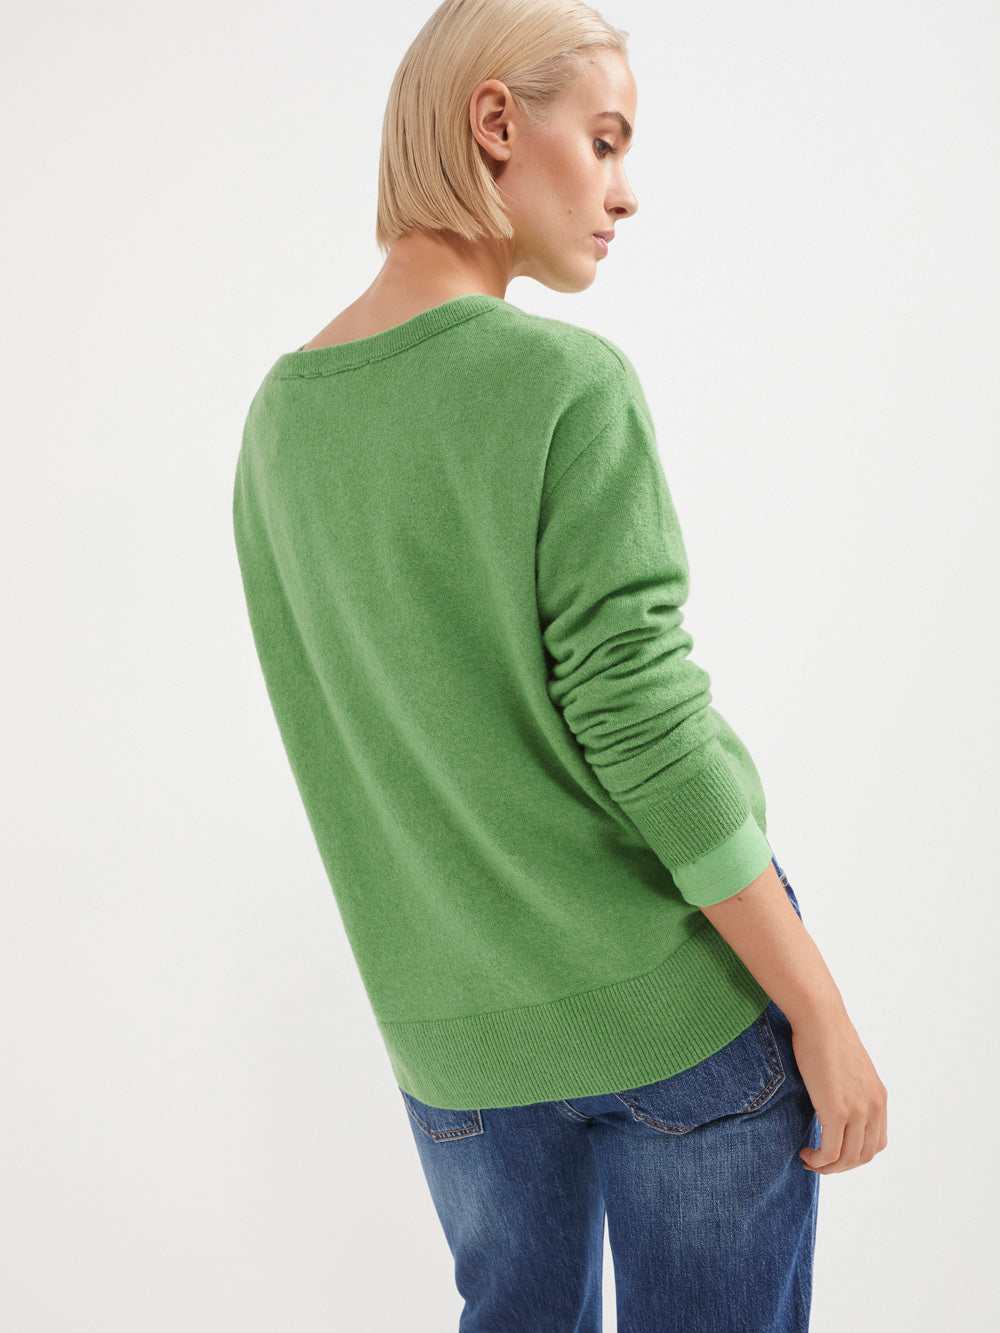 The Relaxed Open Neck Pullover